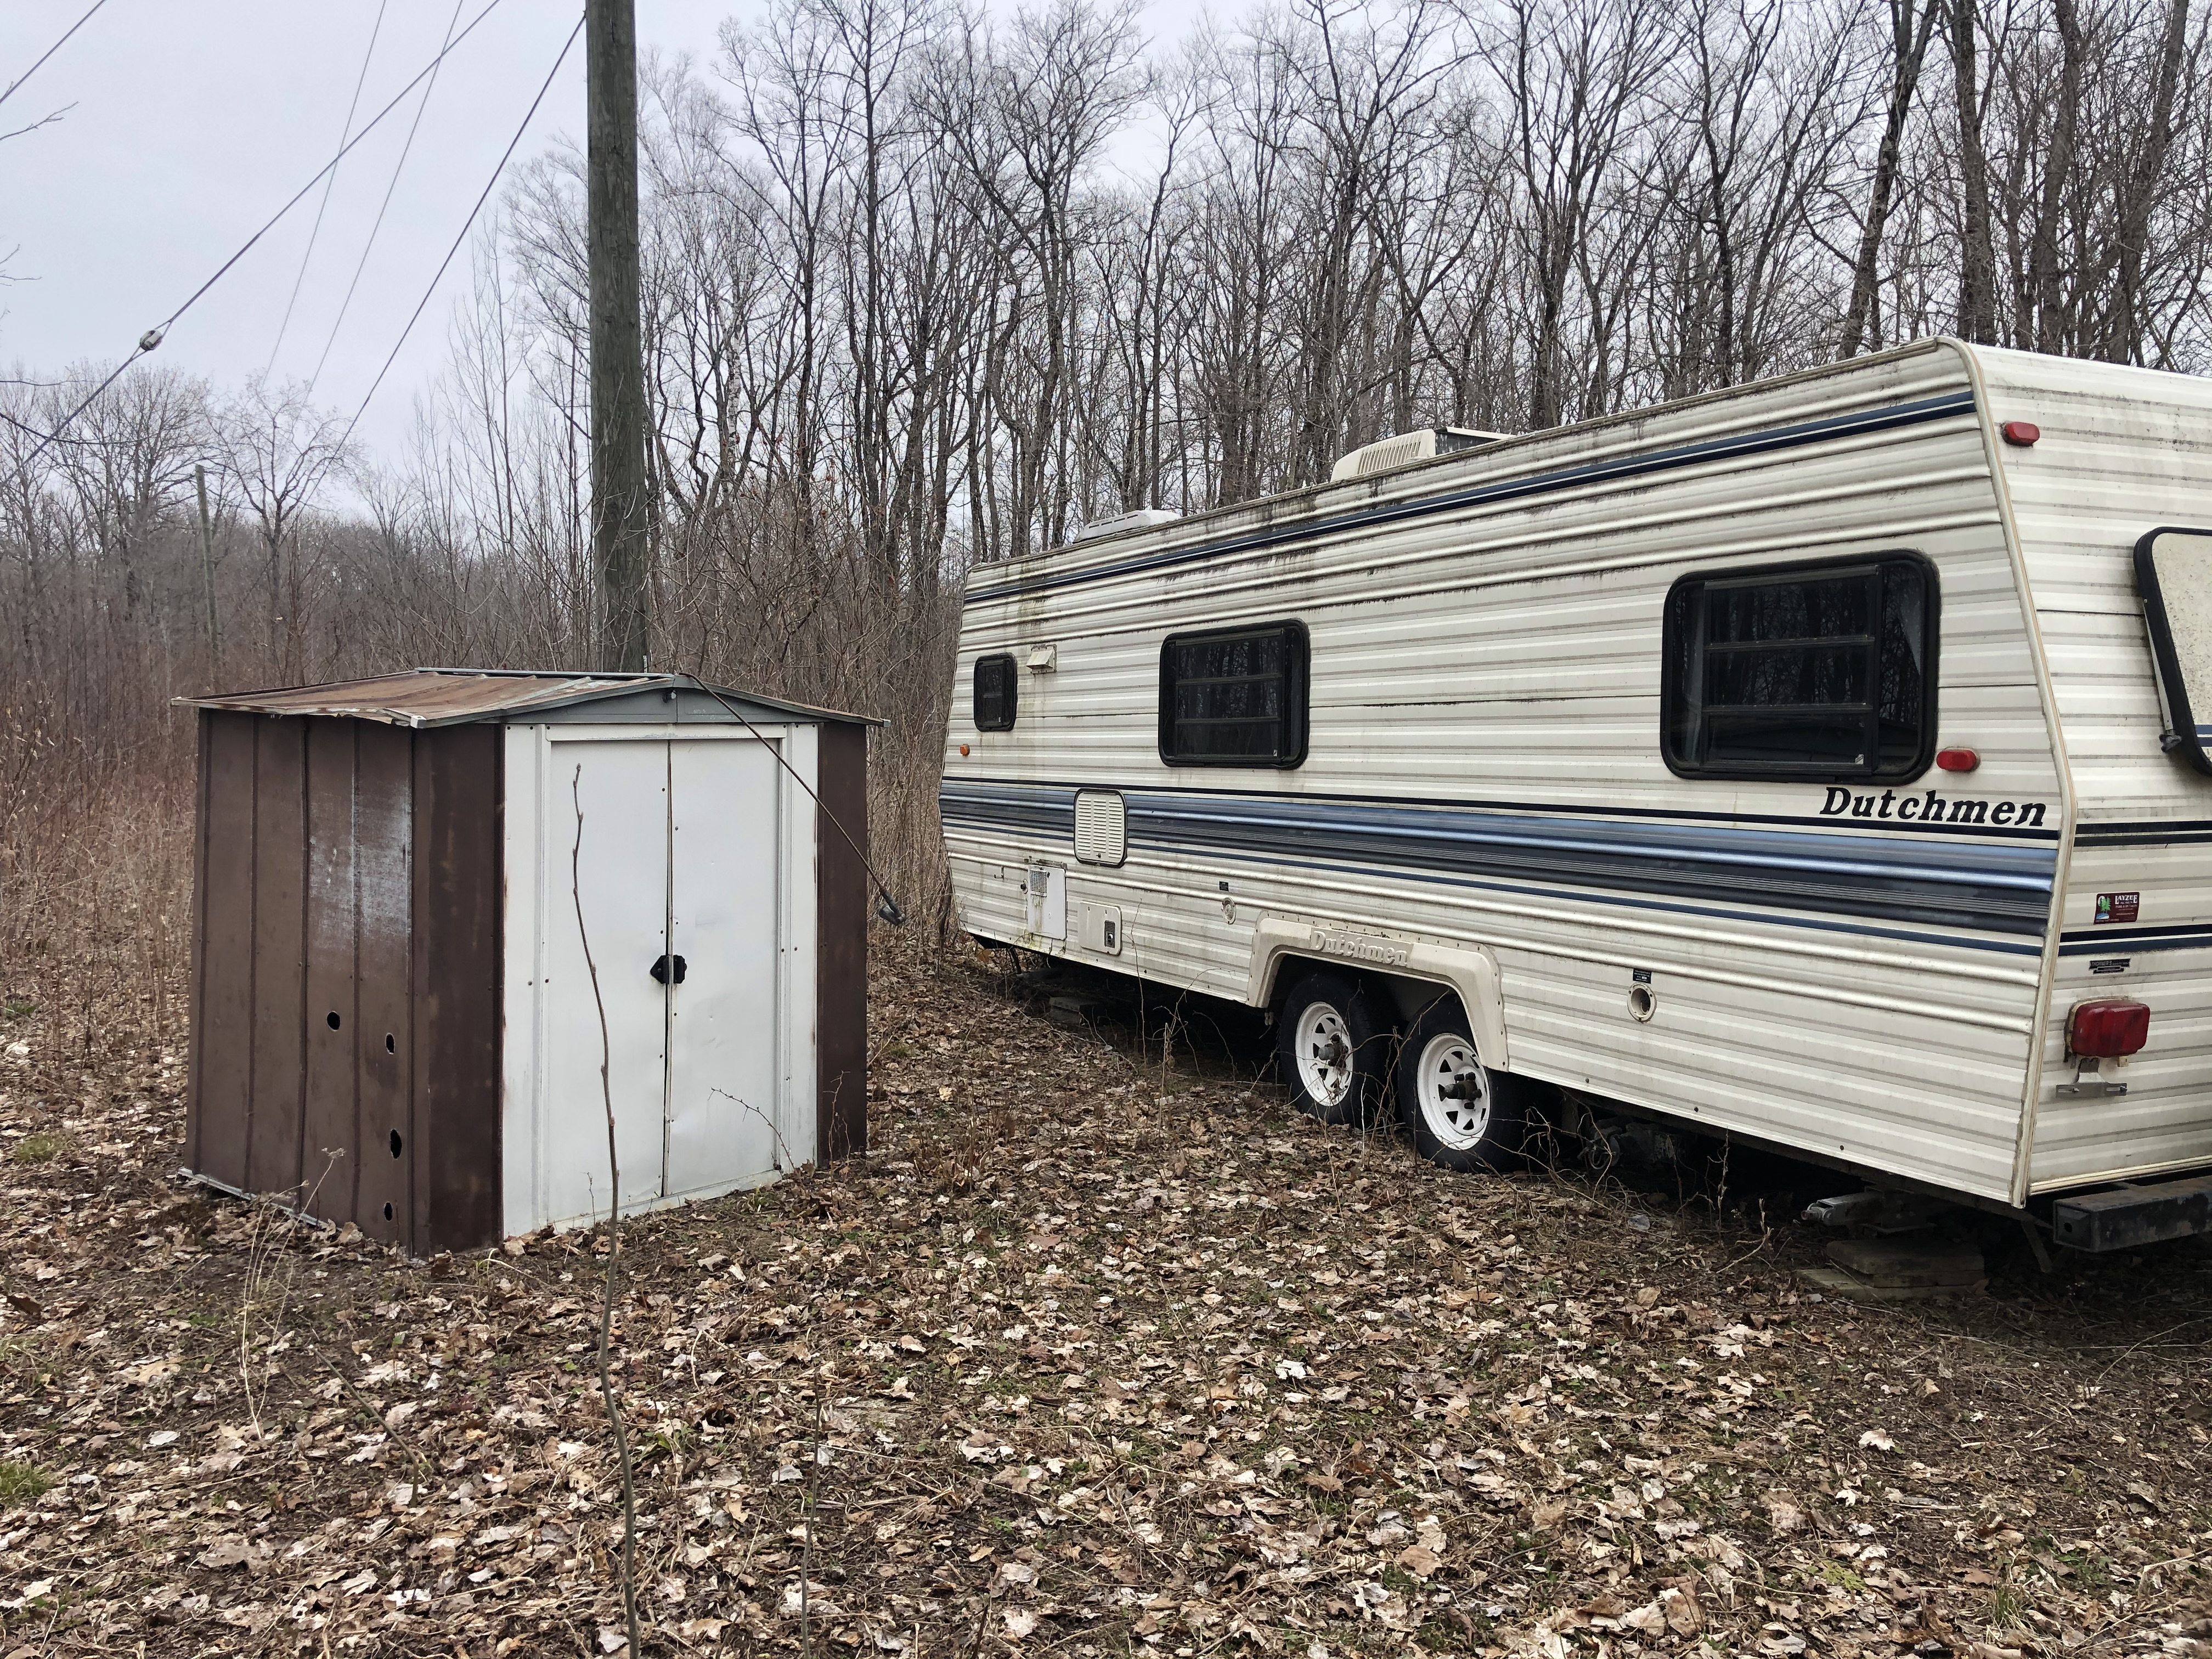 A disheveled camper trailer next to a steel garden shed